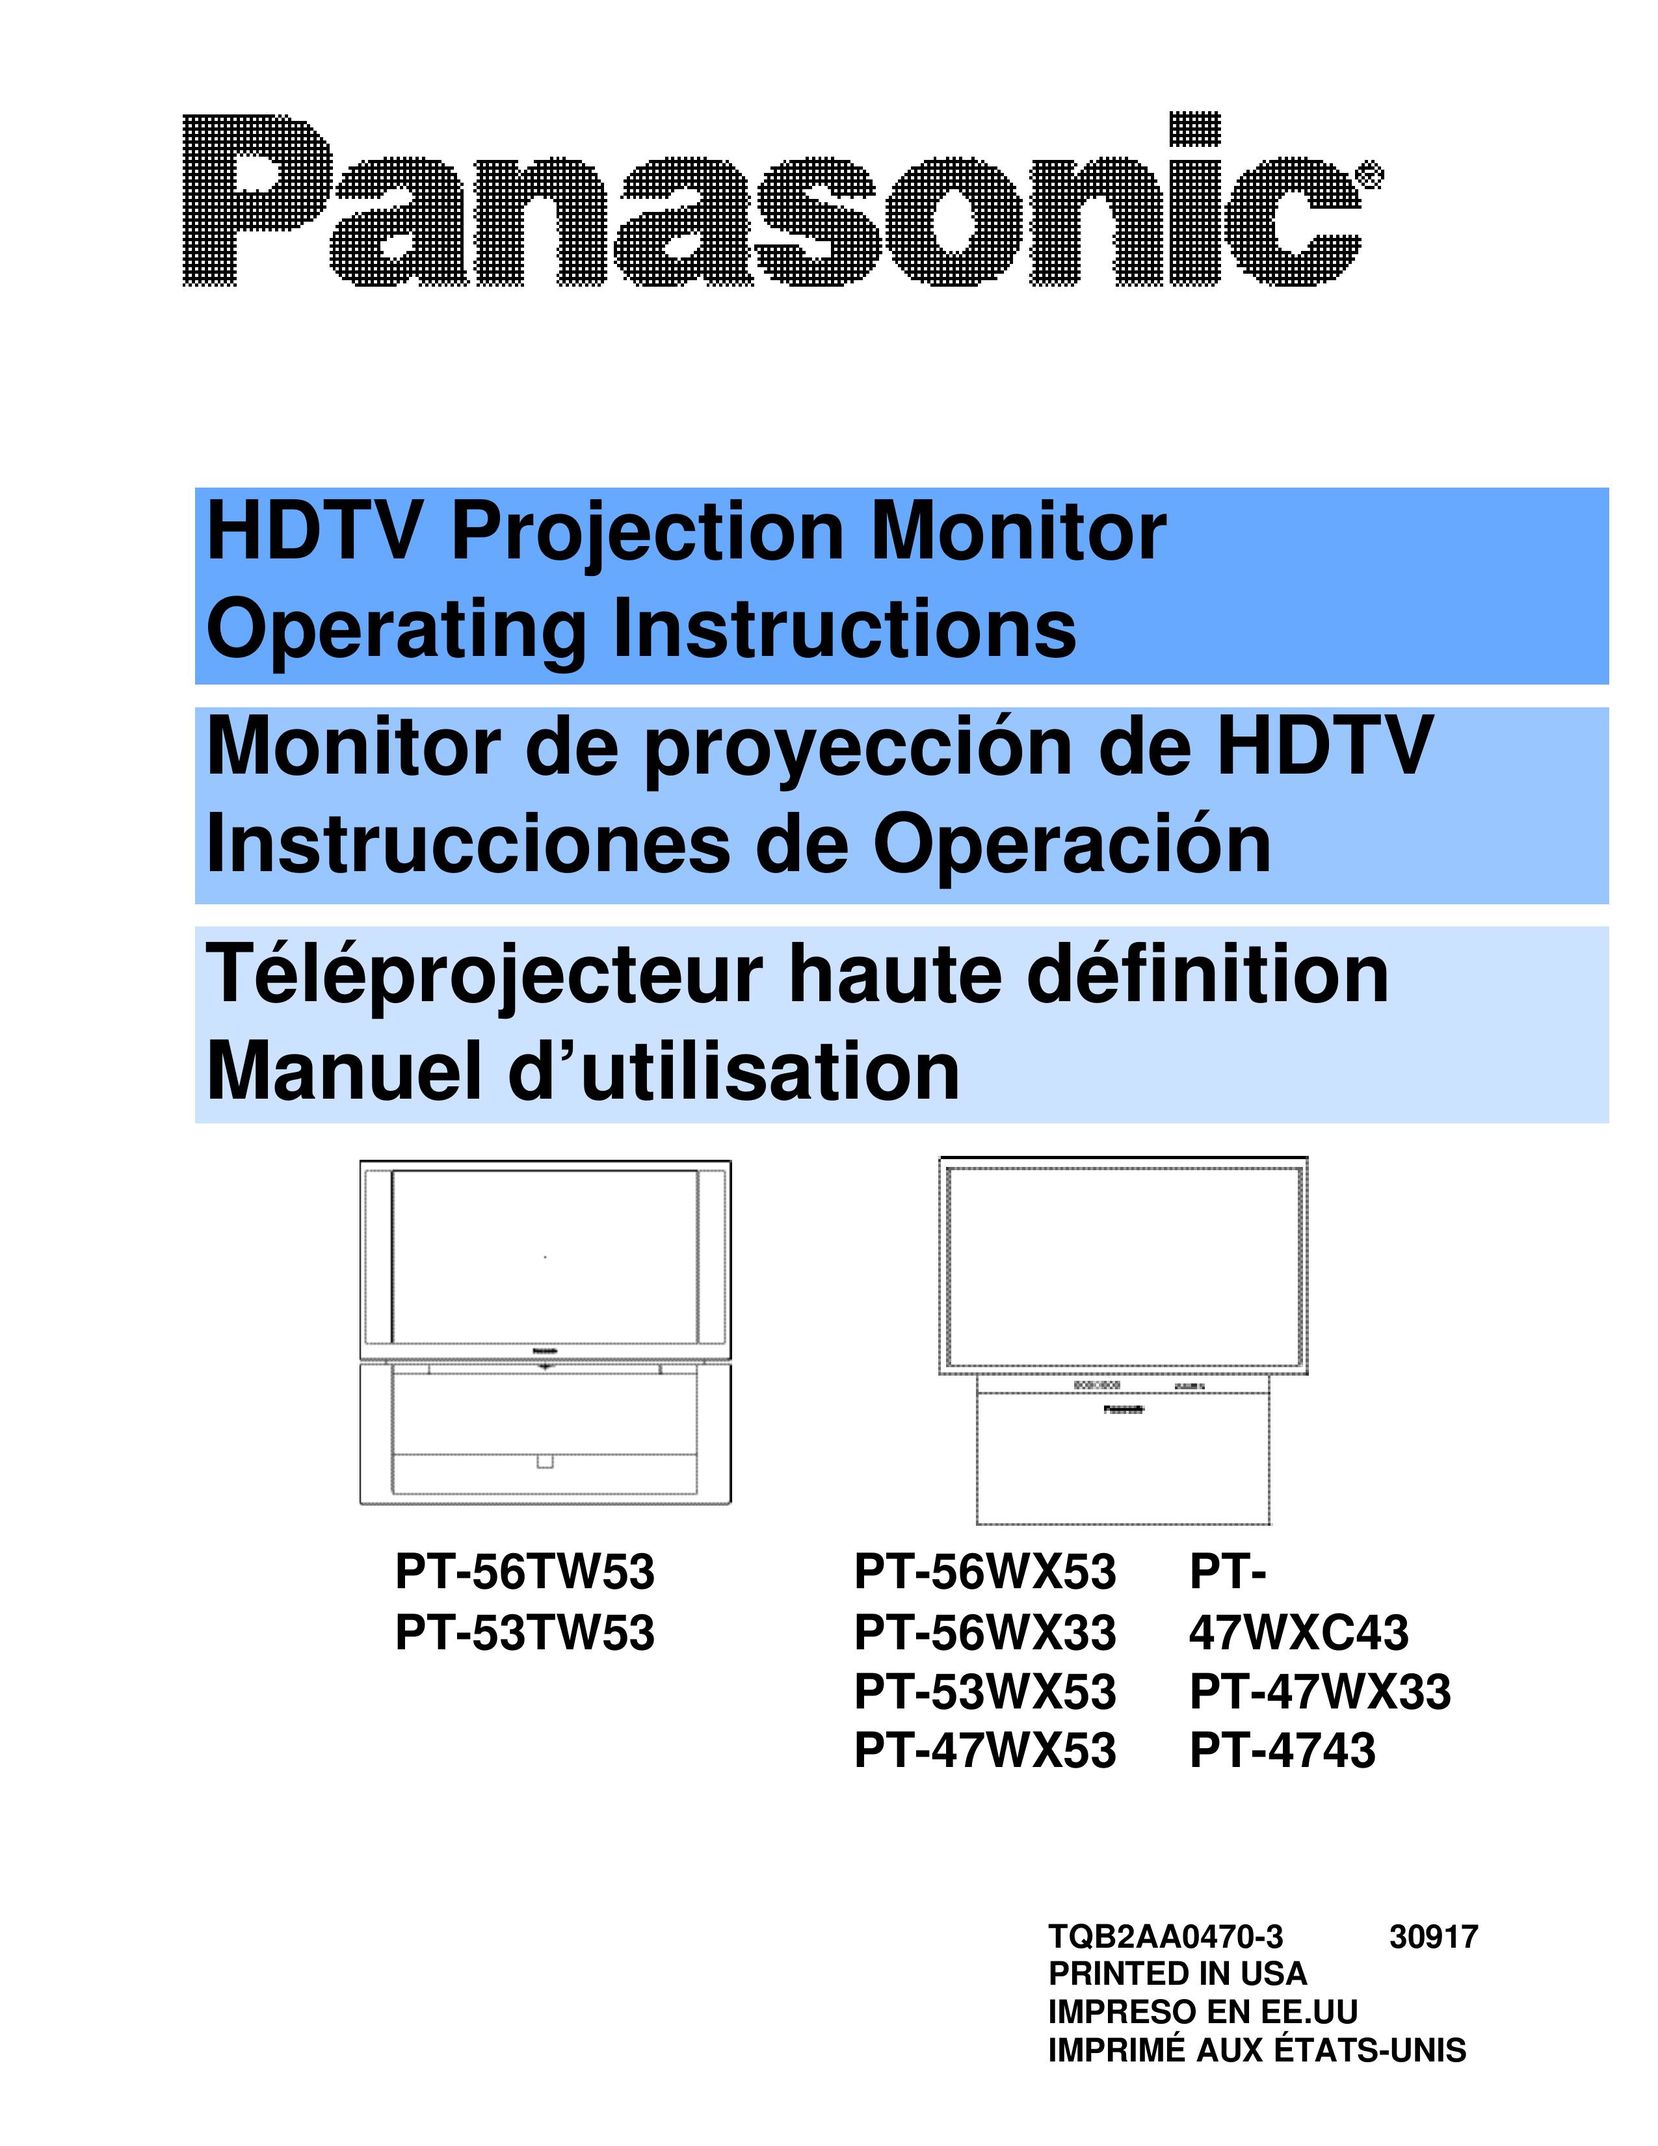 Panasonic PT-47WX33 Home Theater System User Manual